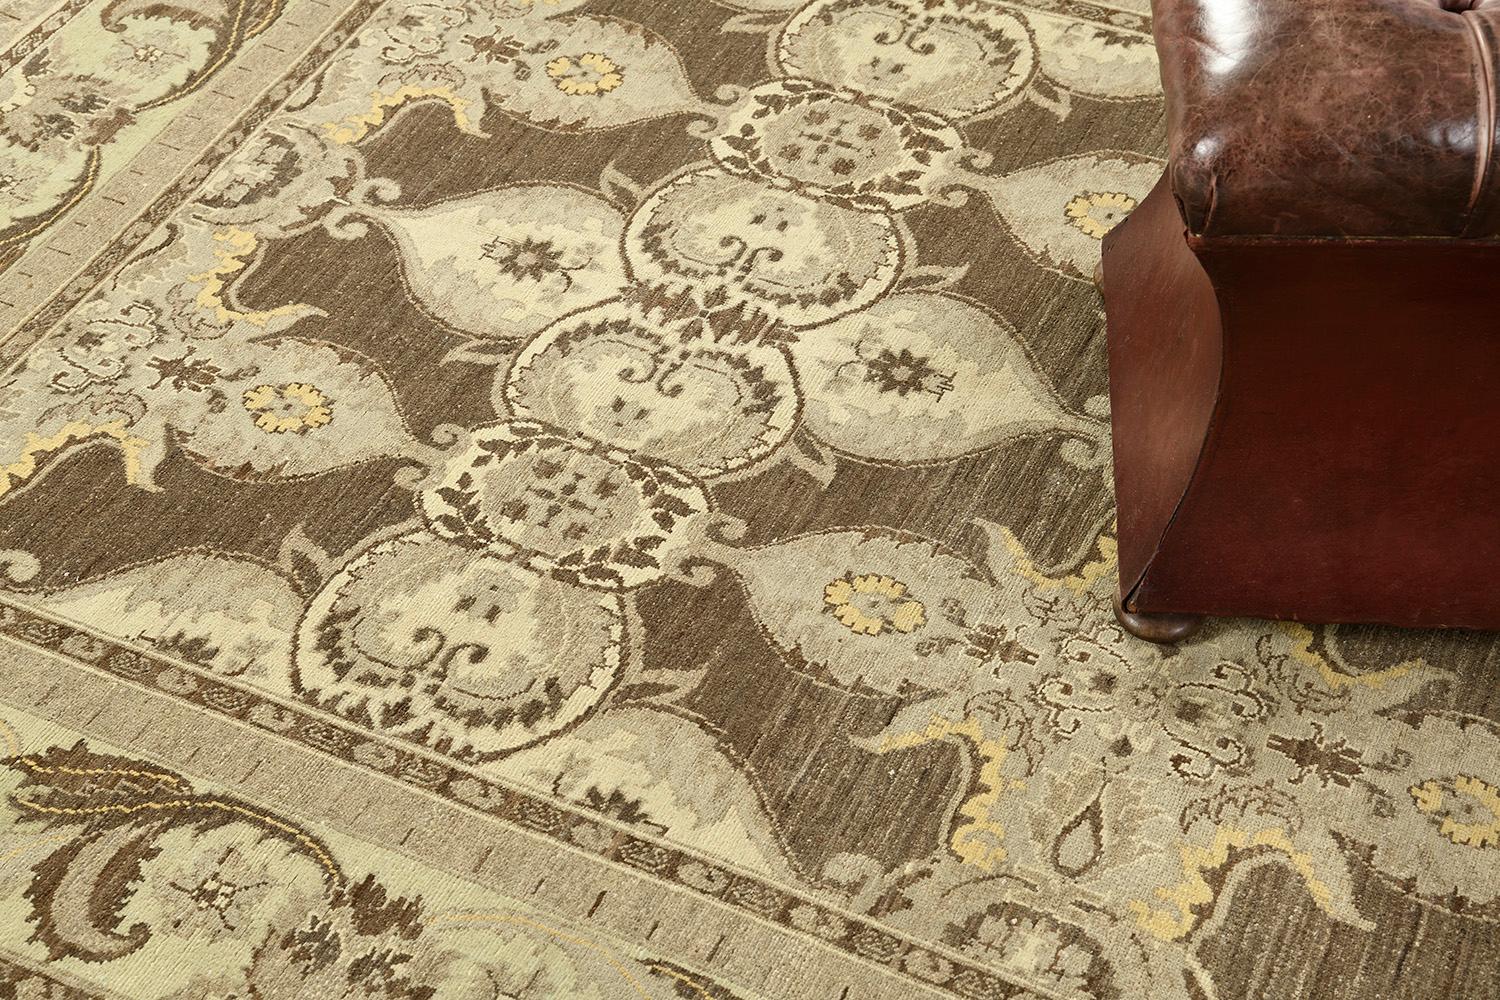 An amazing revival of Arts and Crafts Style rug that features elegant neutral tones. Fabricating gracefully in an opaque brownfield, the mirrored pattern is well-coordinated and matches the theme. Ornamental embellishments are formed flawlessly